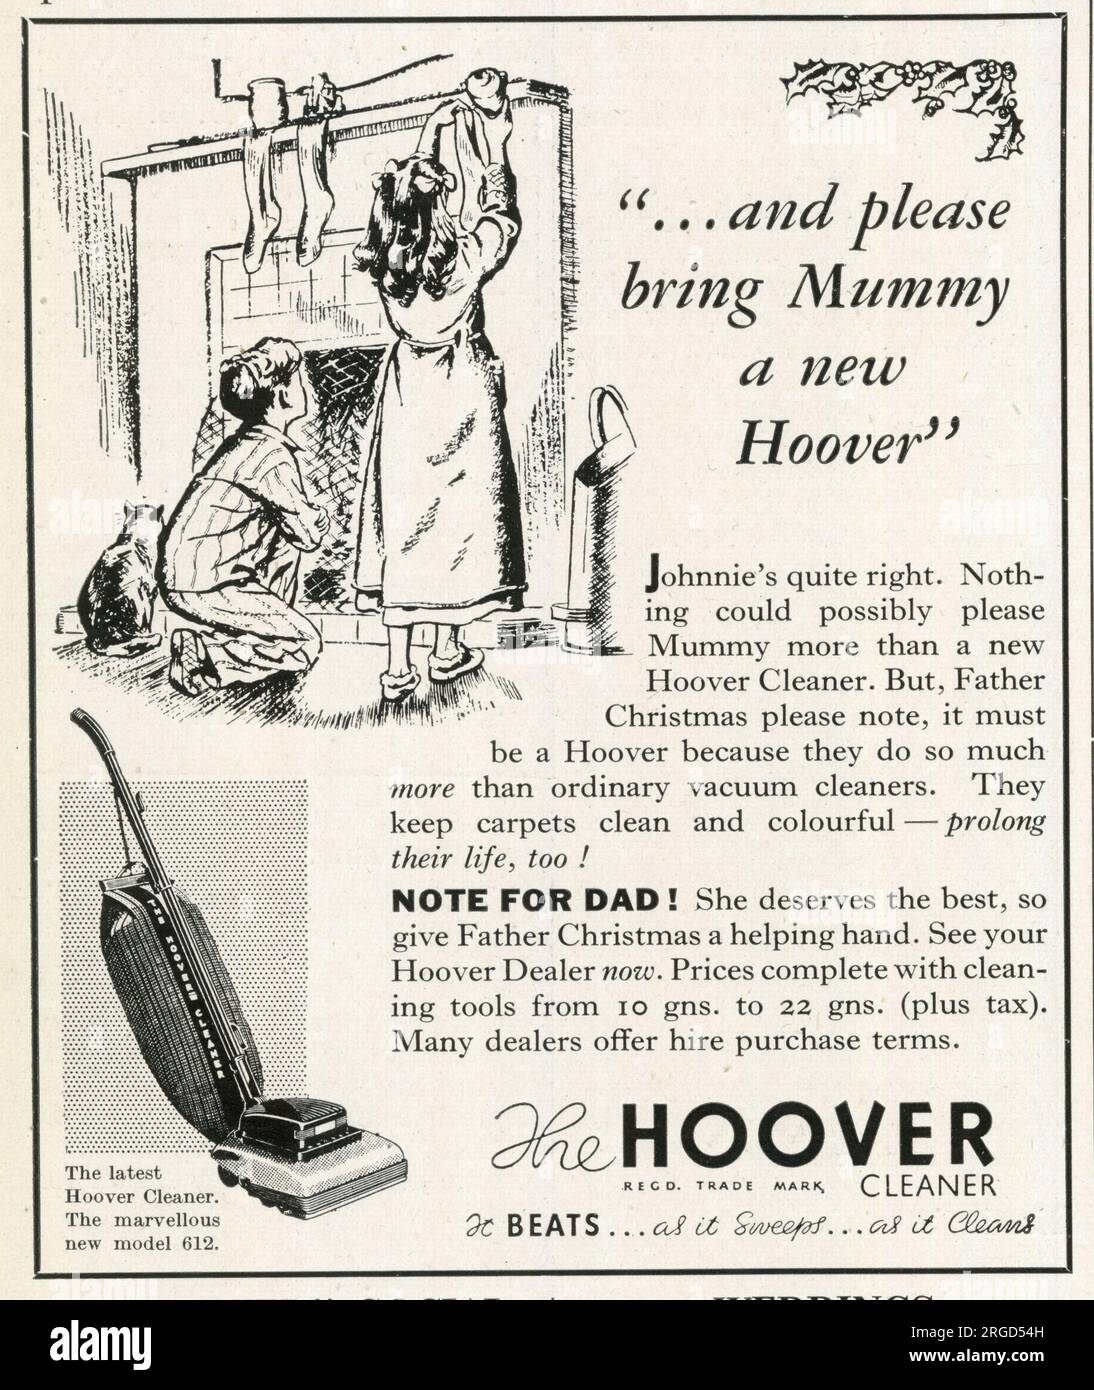 Advert, '... and please bring Mummy a new Hoover' - children hang up their Christmas stockings Stock Photo